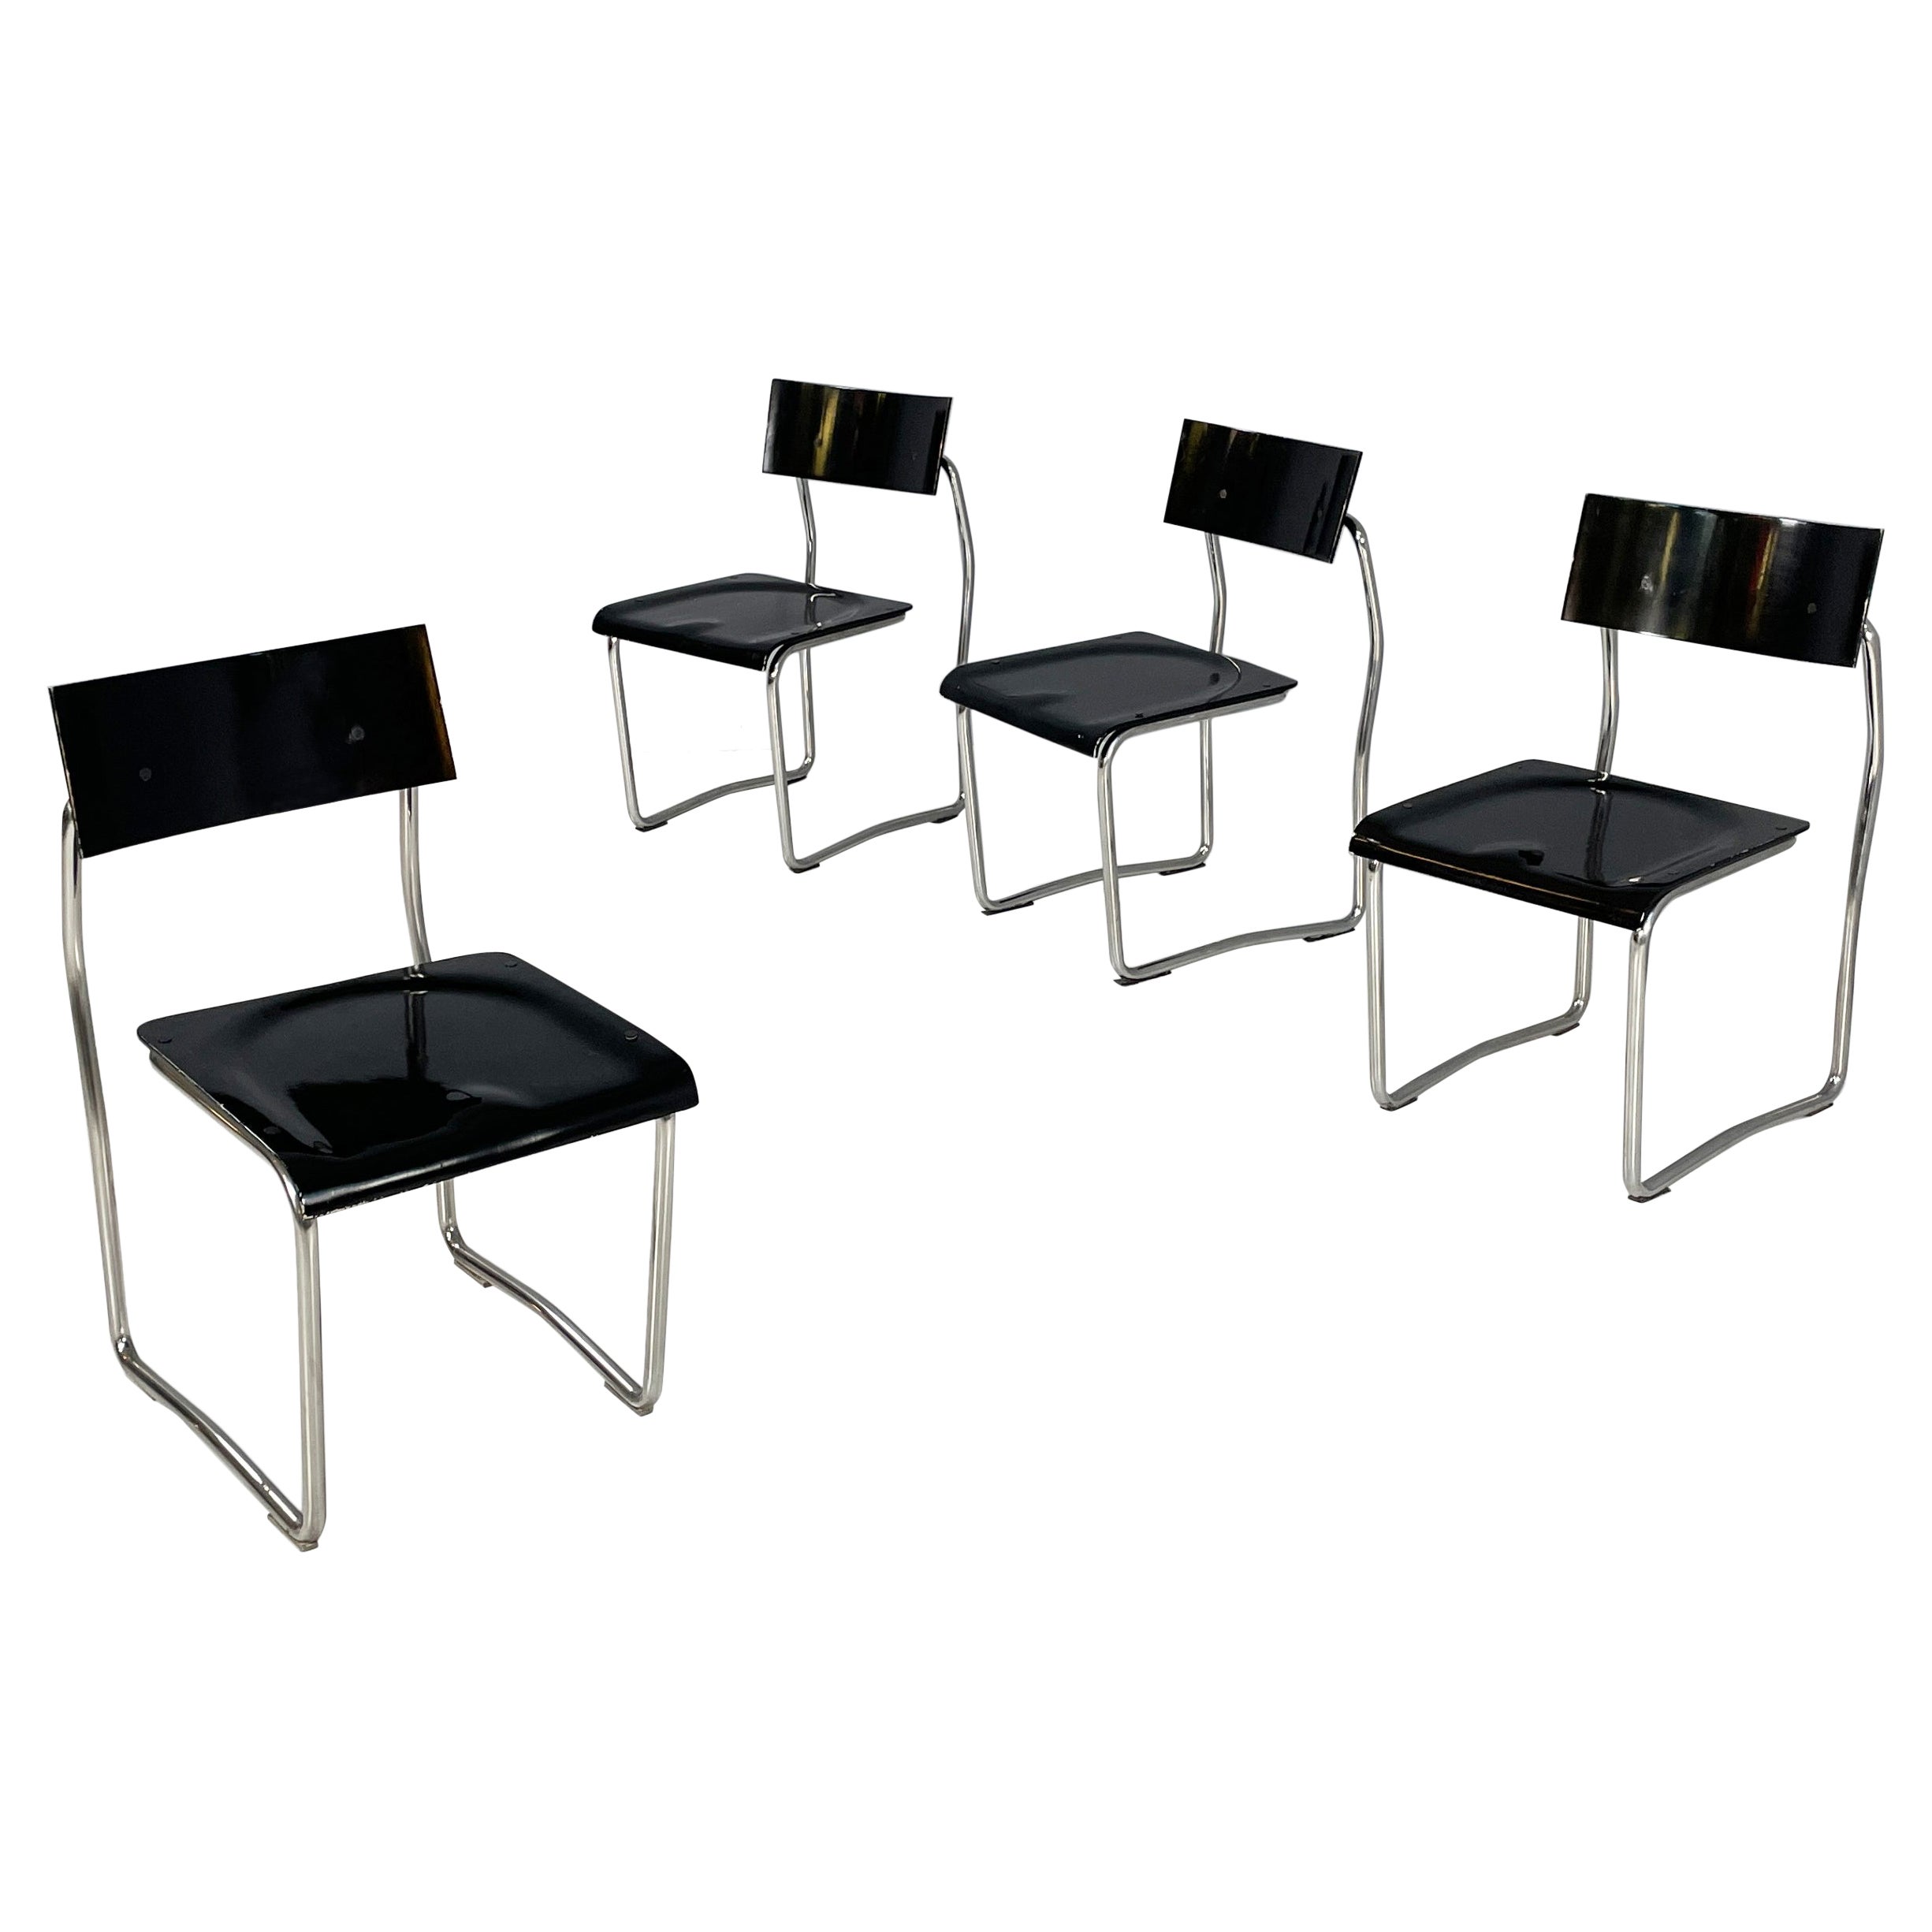 Italian modern Black wood and metal Chairs Lariana by Terragni for Zanotta, 1980 For Sale